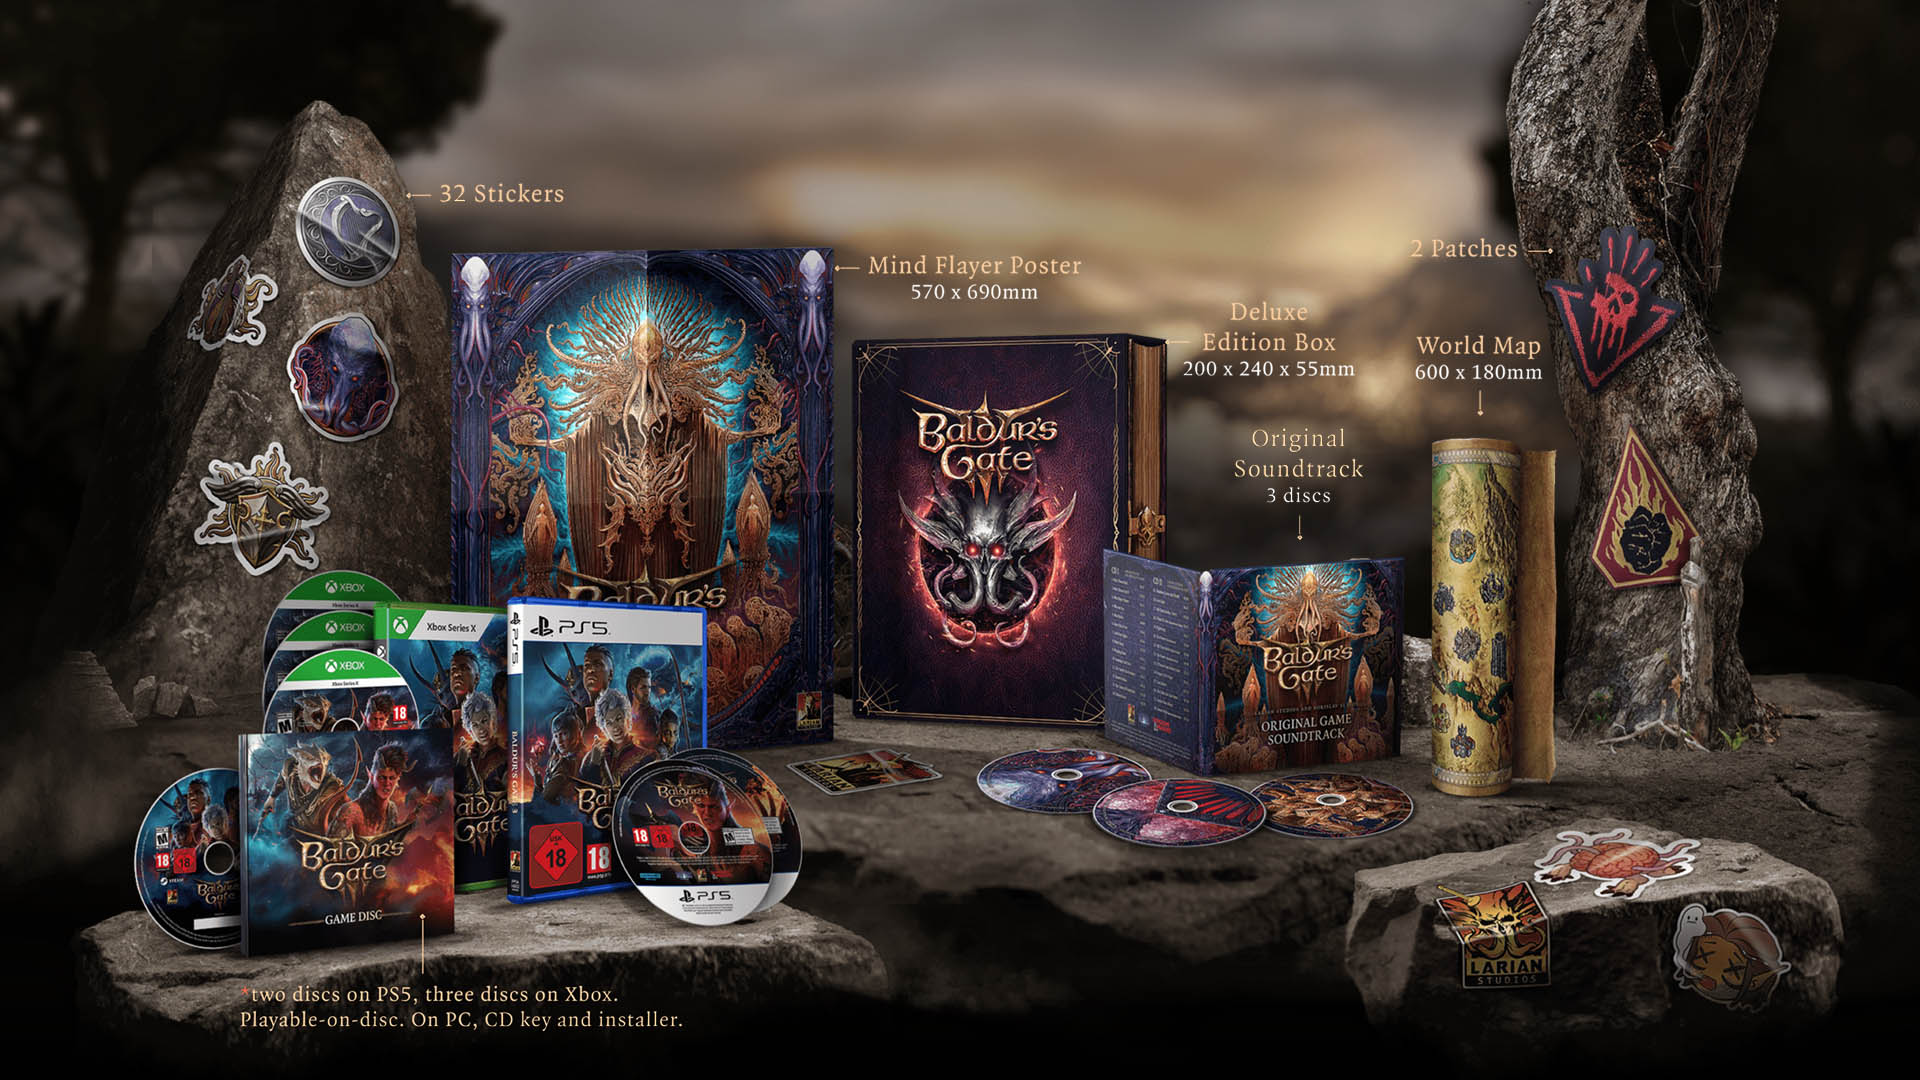 Baldur’s Gate III physical Deluxe Edition revealed